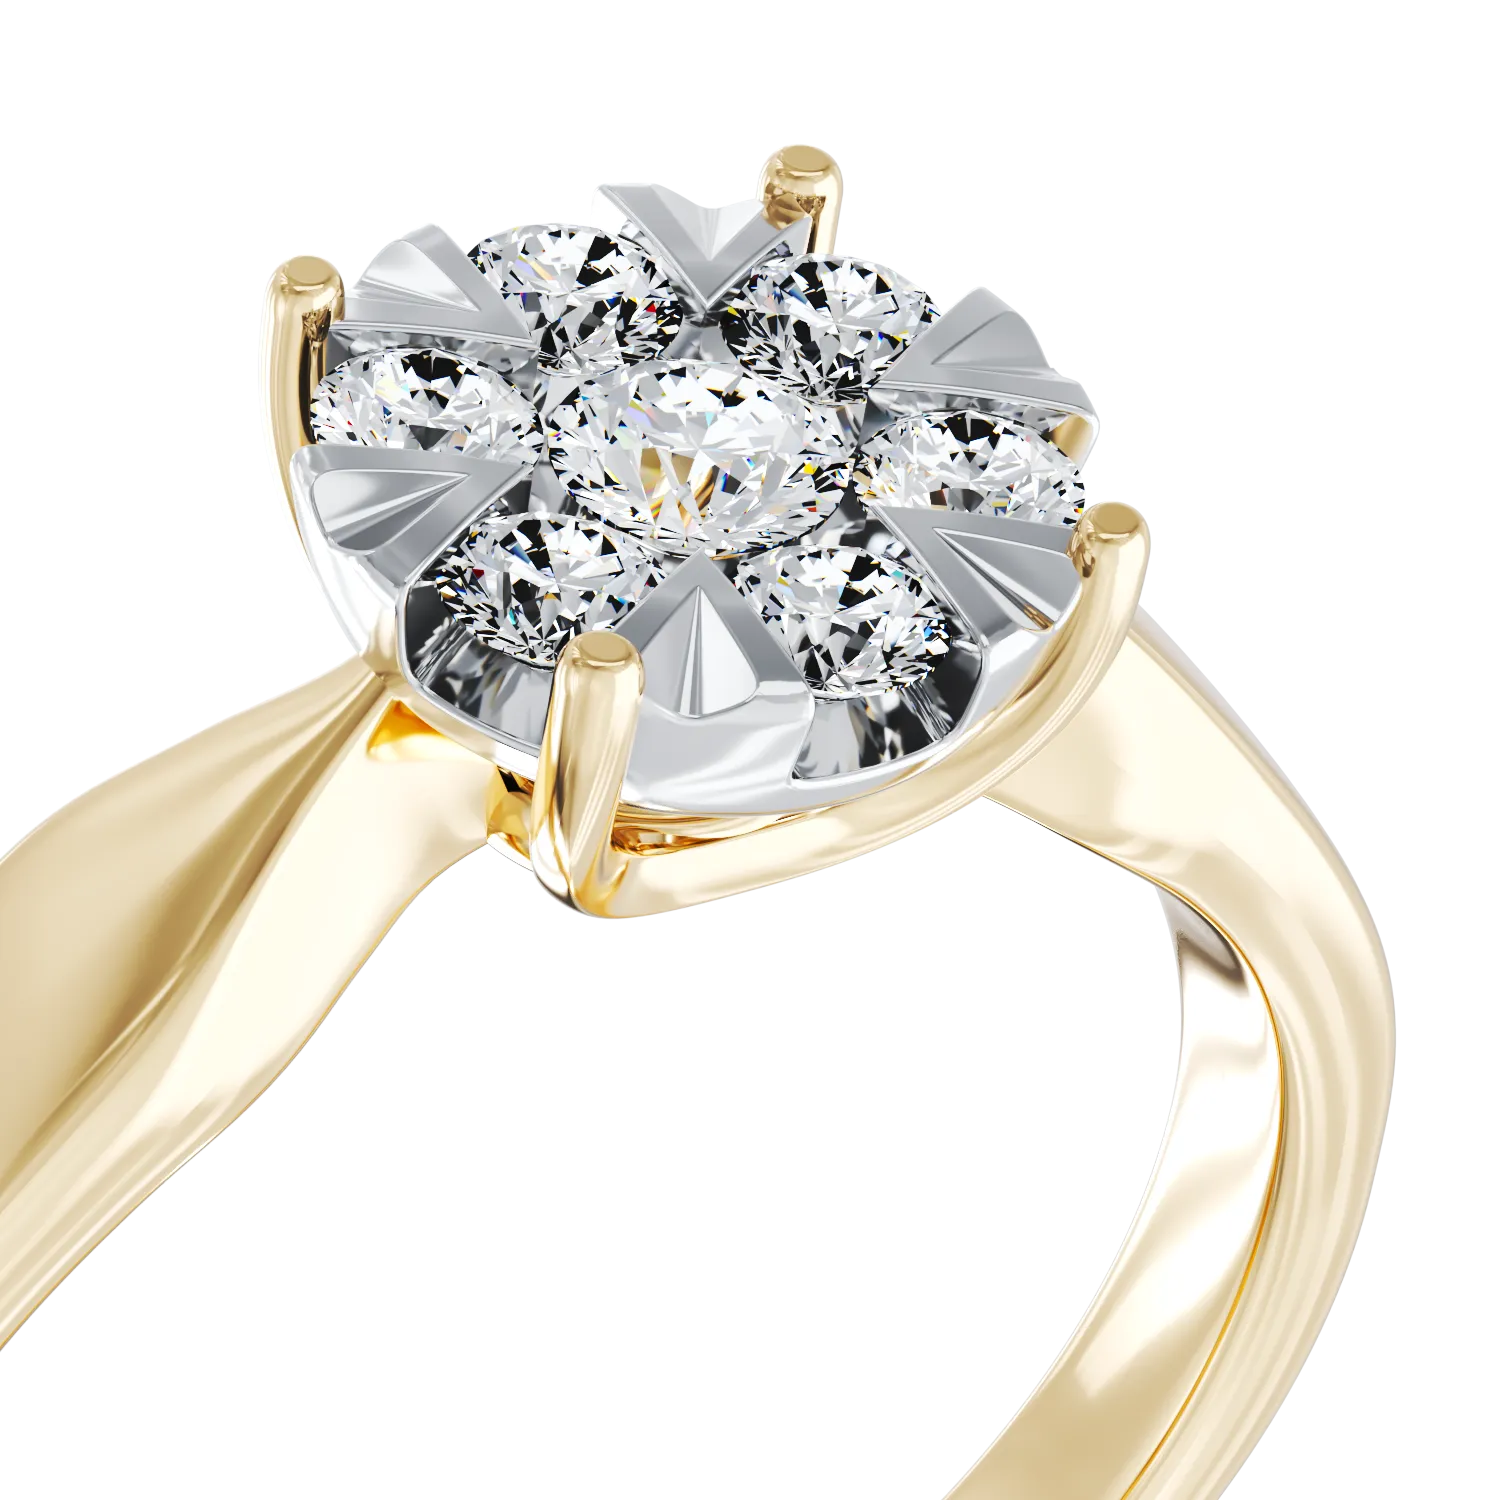 18K yellow gold engagement ring with 0.34ct diamonds